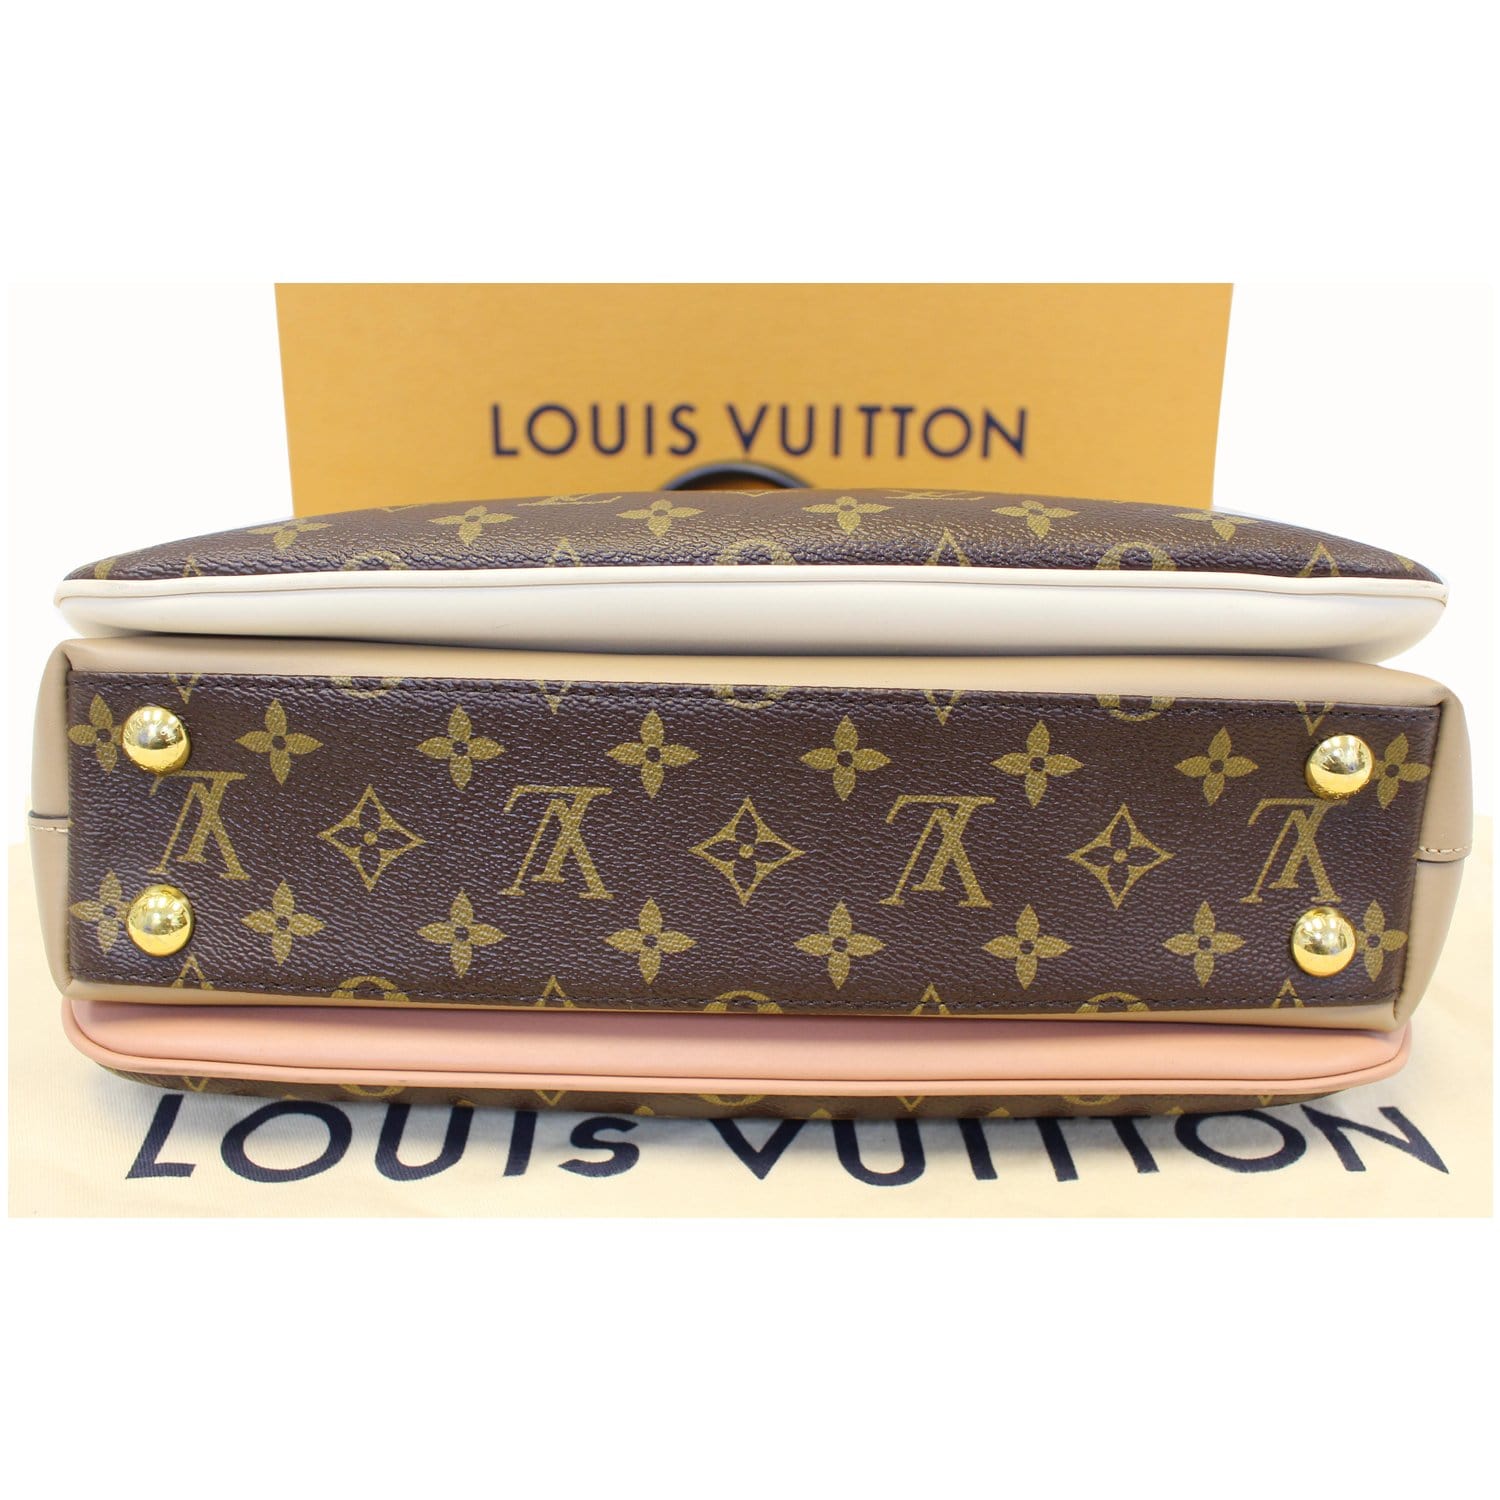 Louis Vuitton - Authenticated Millefeuille Handbag - Leather Brown for Women, Never Worn